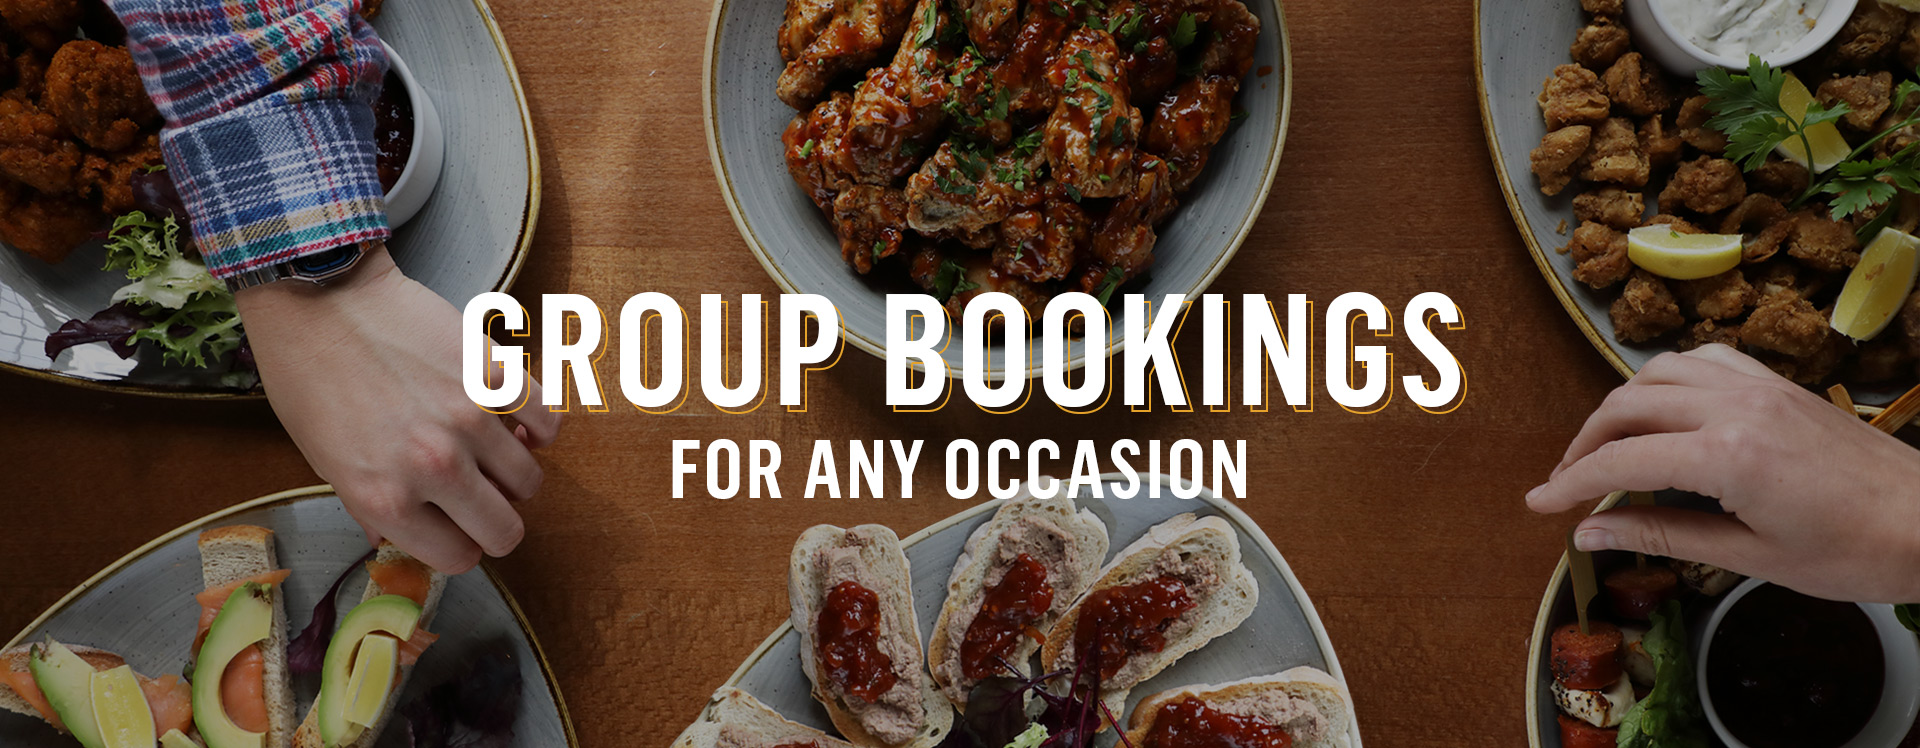 Group Bookings at The Henry Addington